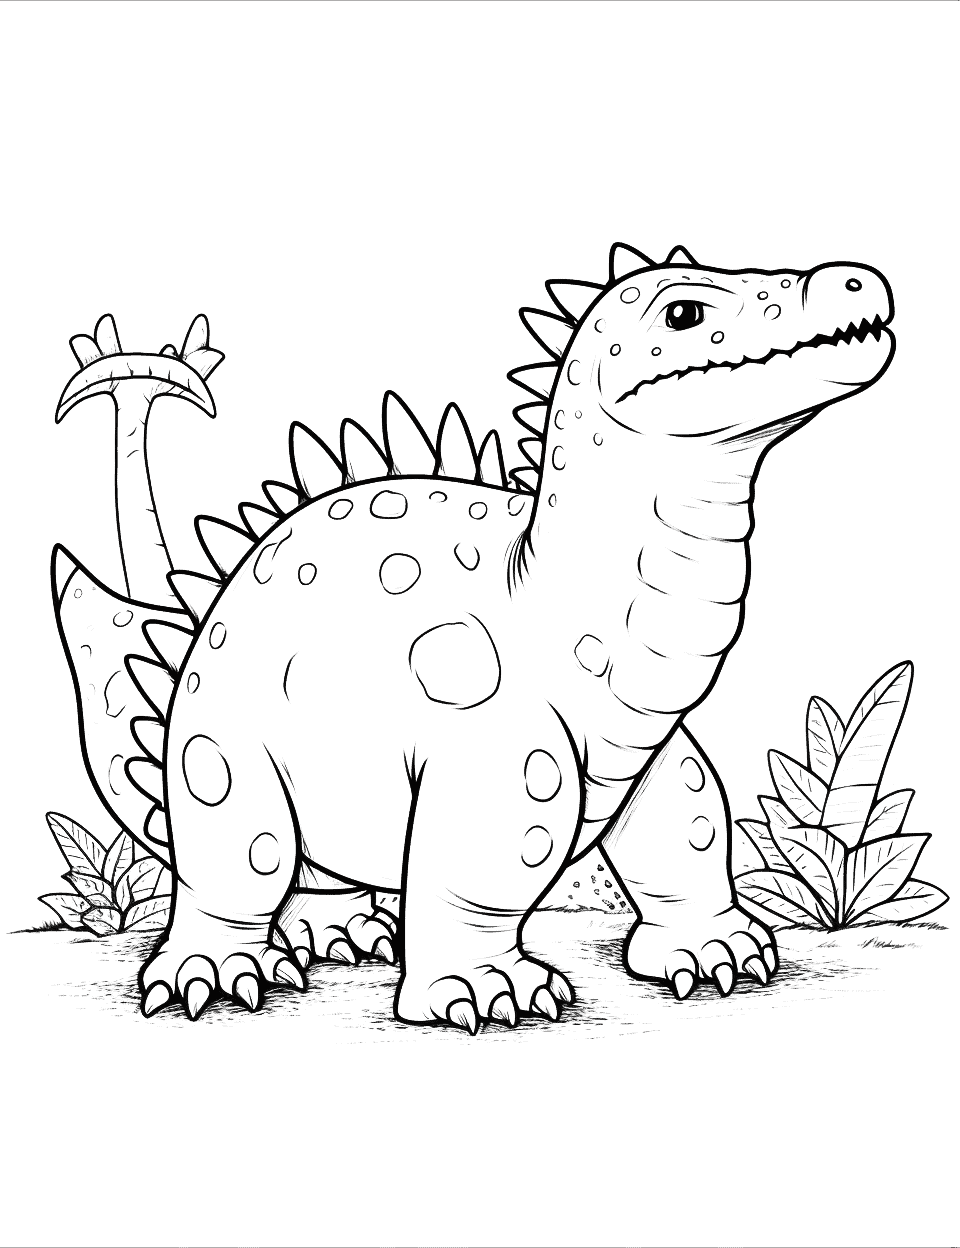 Ankylosaurus Defense Coloring Page - An Ankylosaurus using its tail club to defend against a predator.